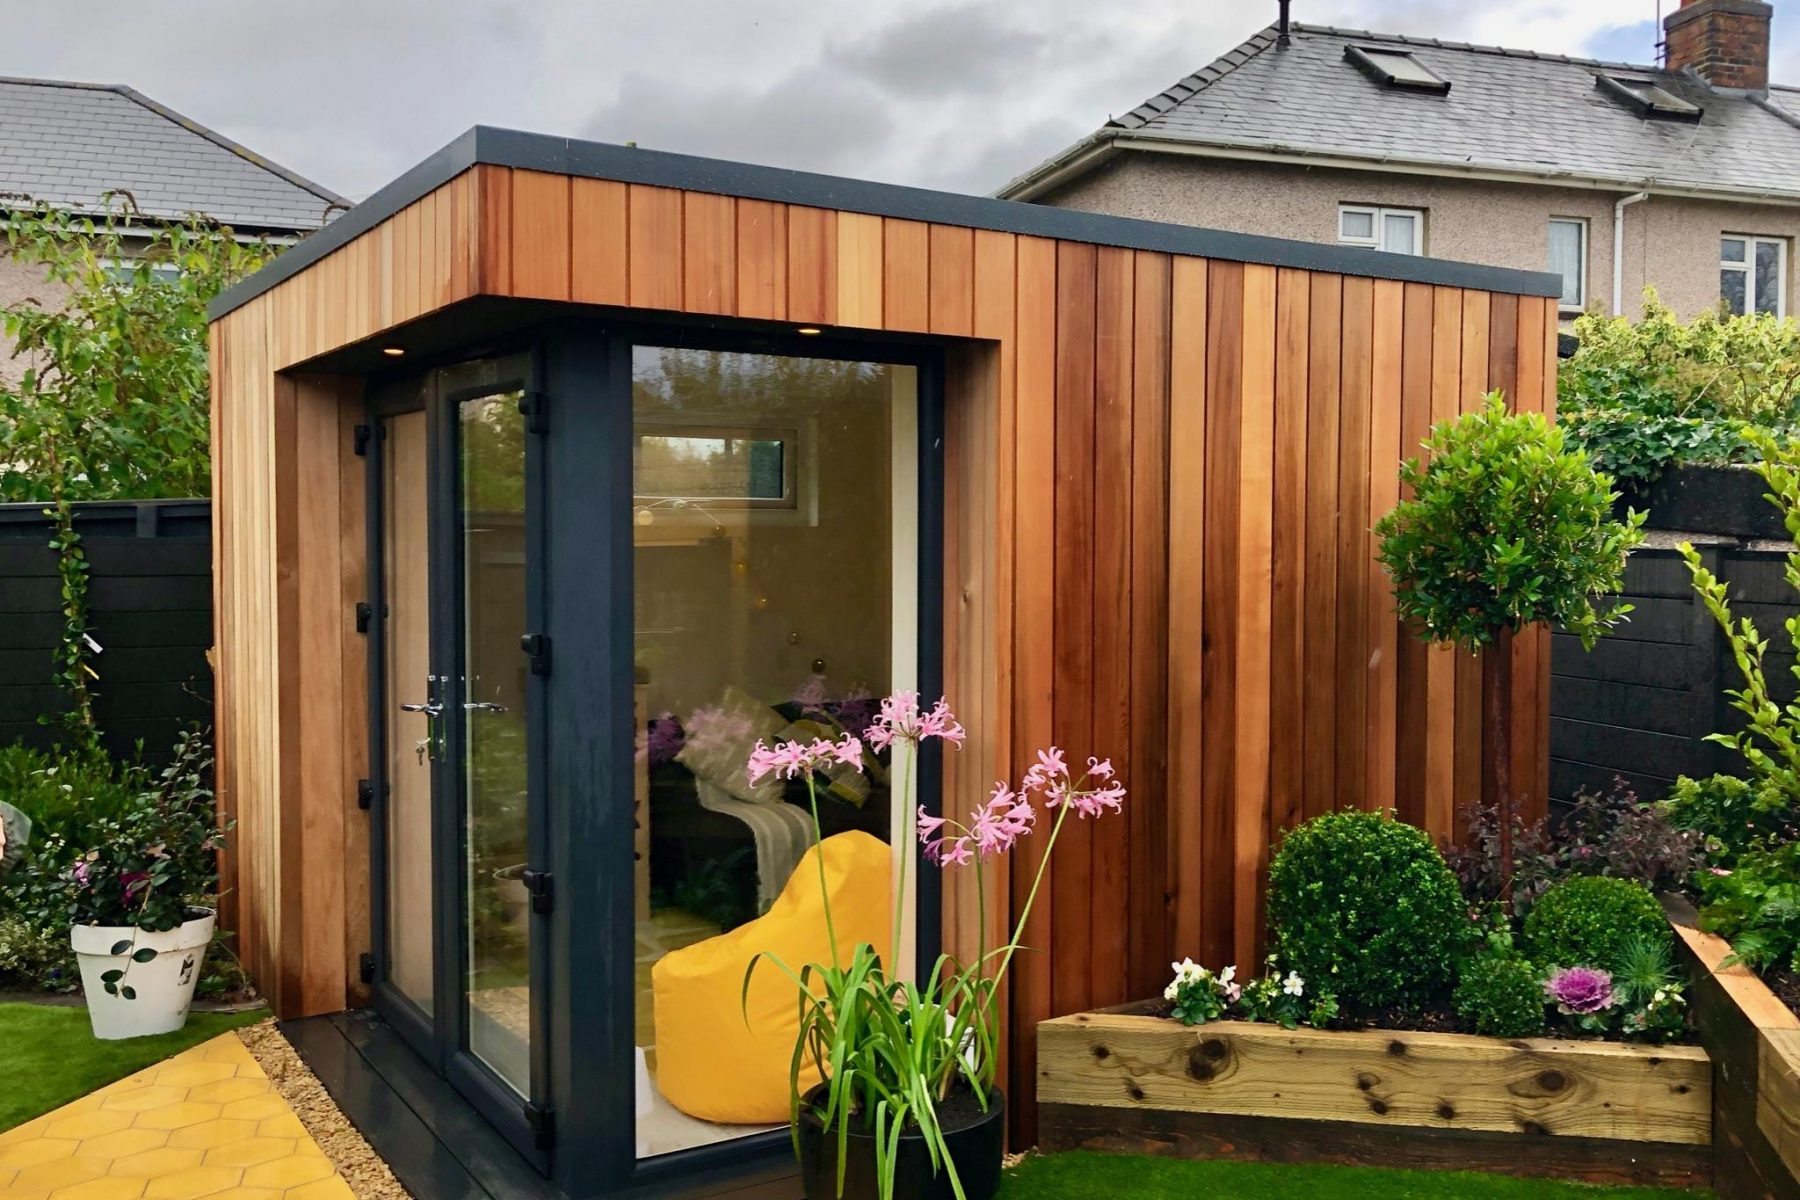 Furnished Vivid Green garden room with western red cedar cladding, anthracite grey corner glass door and windows, yellow beanbag, and surrounded by pot plants, foliage and a yellow walkway.